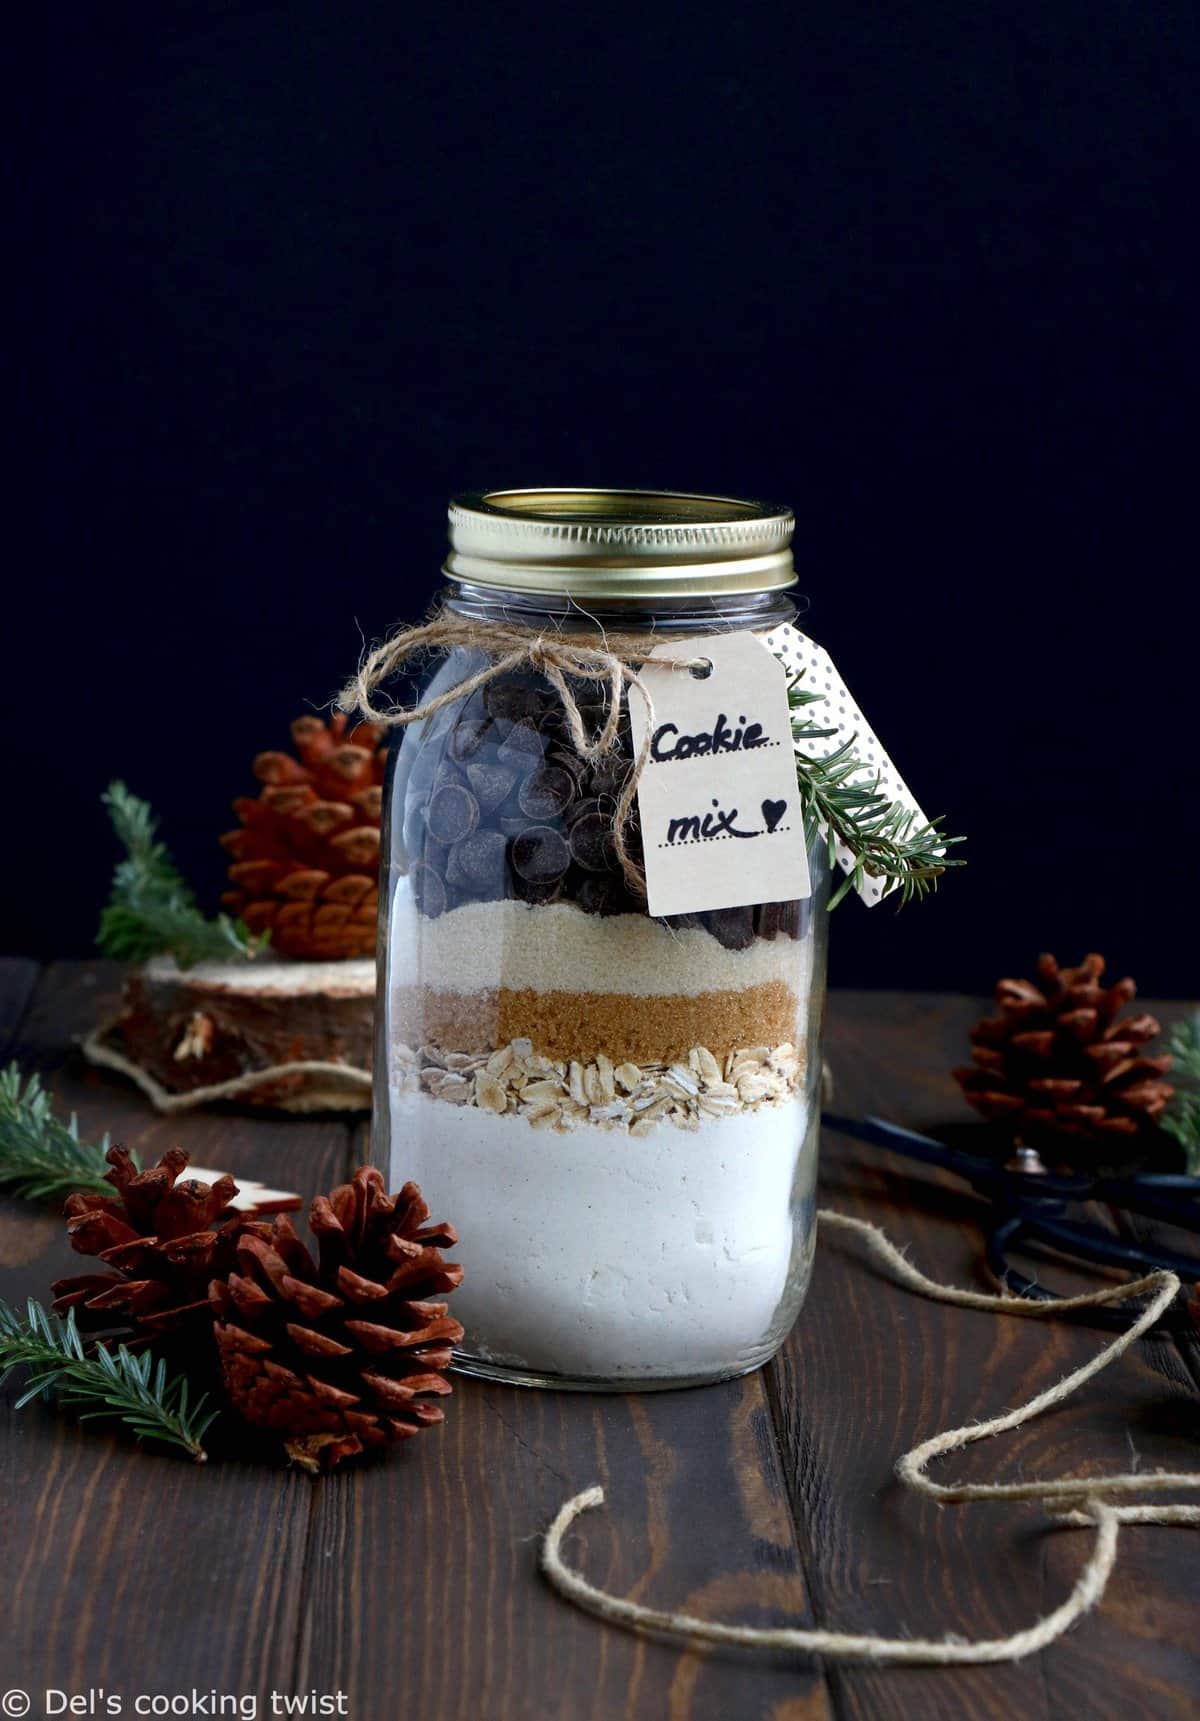 Christmas Cookie Mix in a Jar Gift Idea